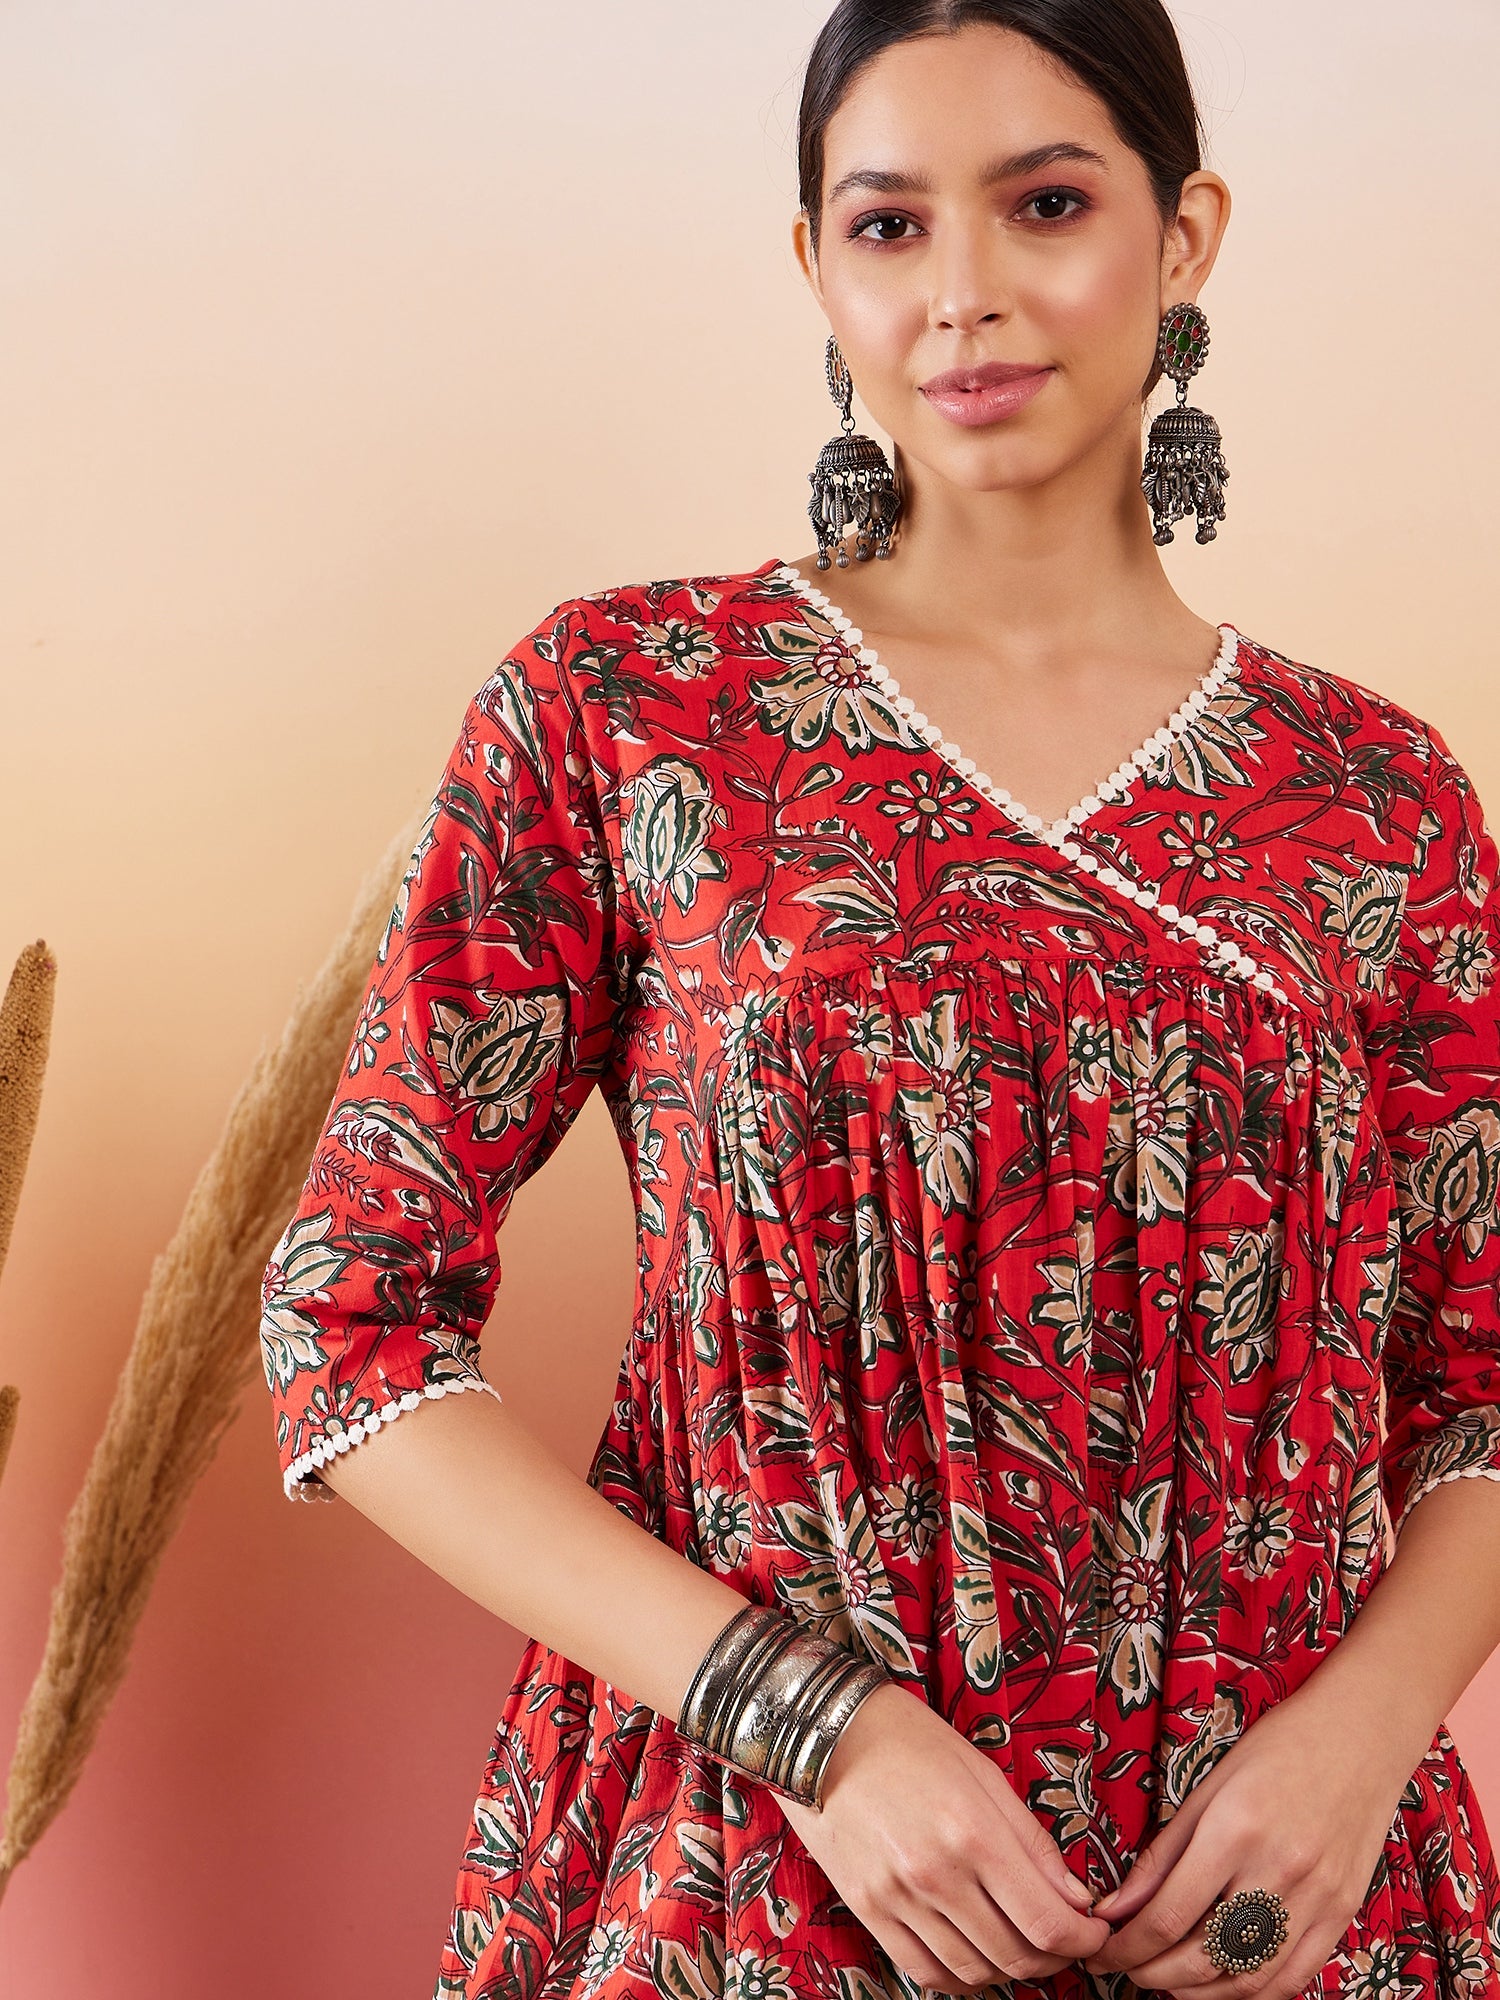 Vermillion Red Floral Print Angrakhaa V Neck Lace Dress